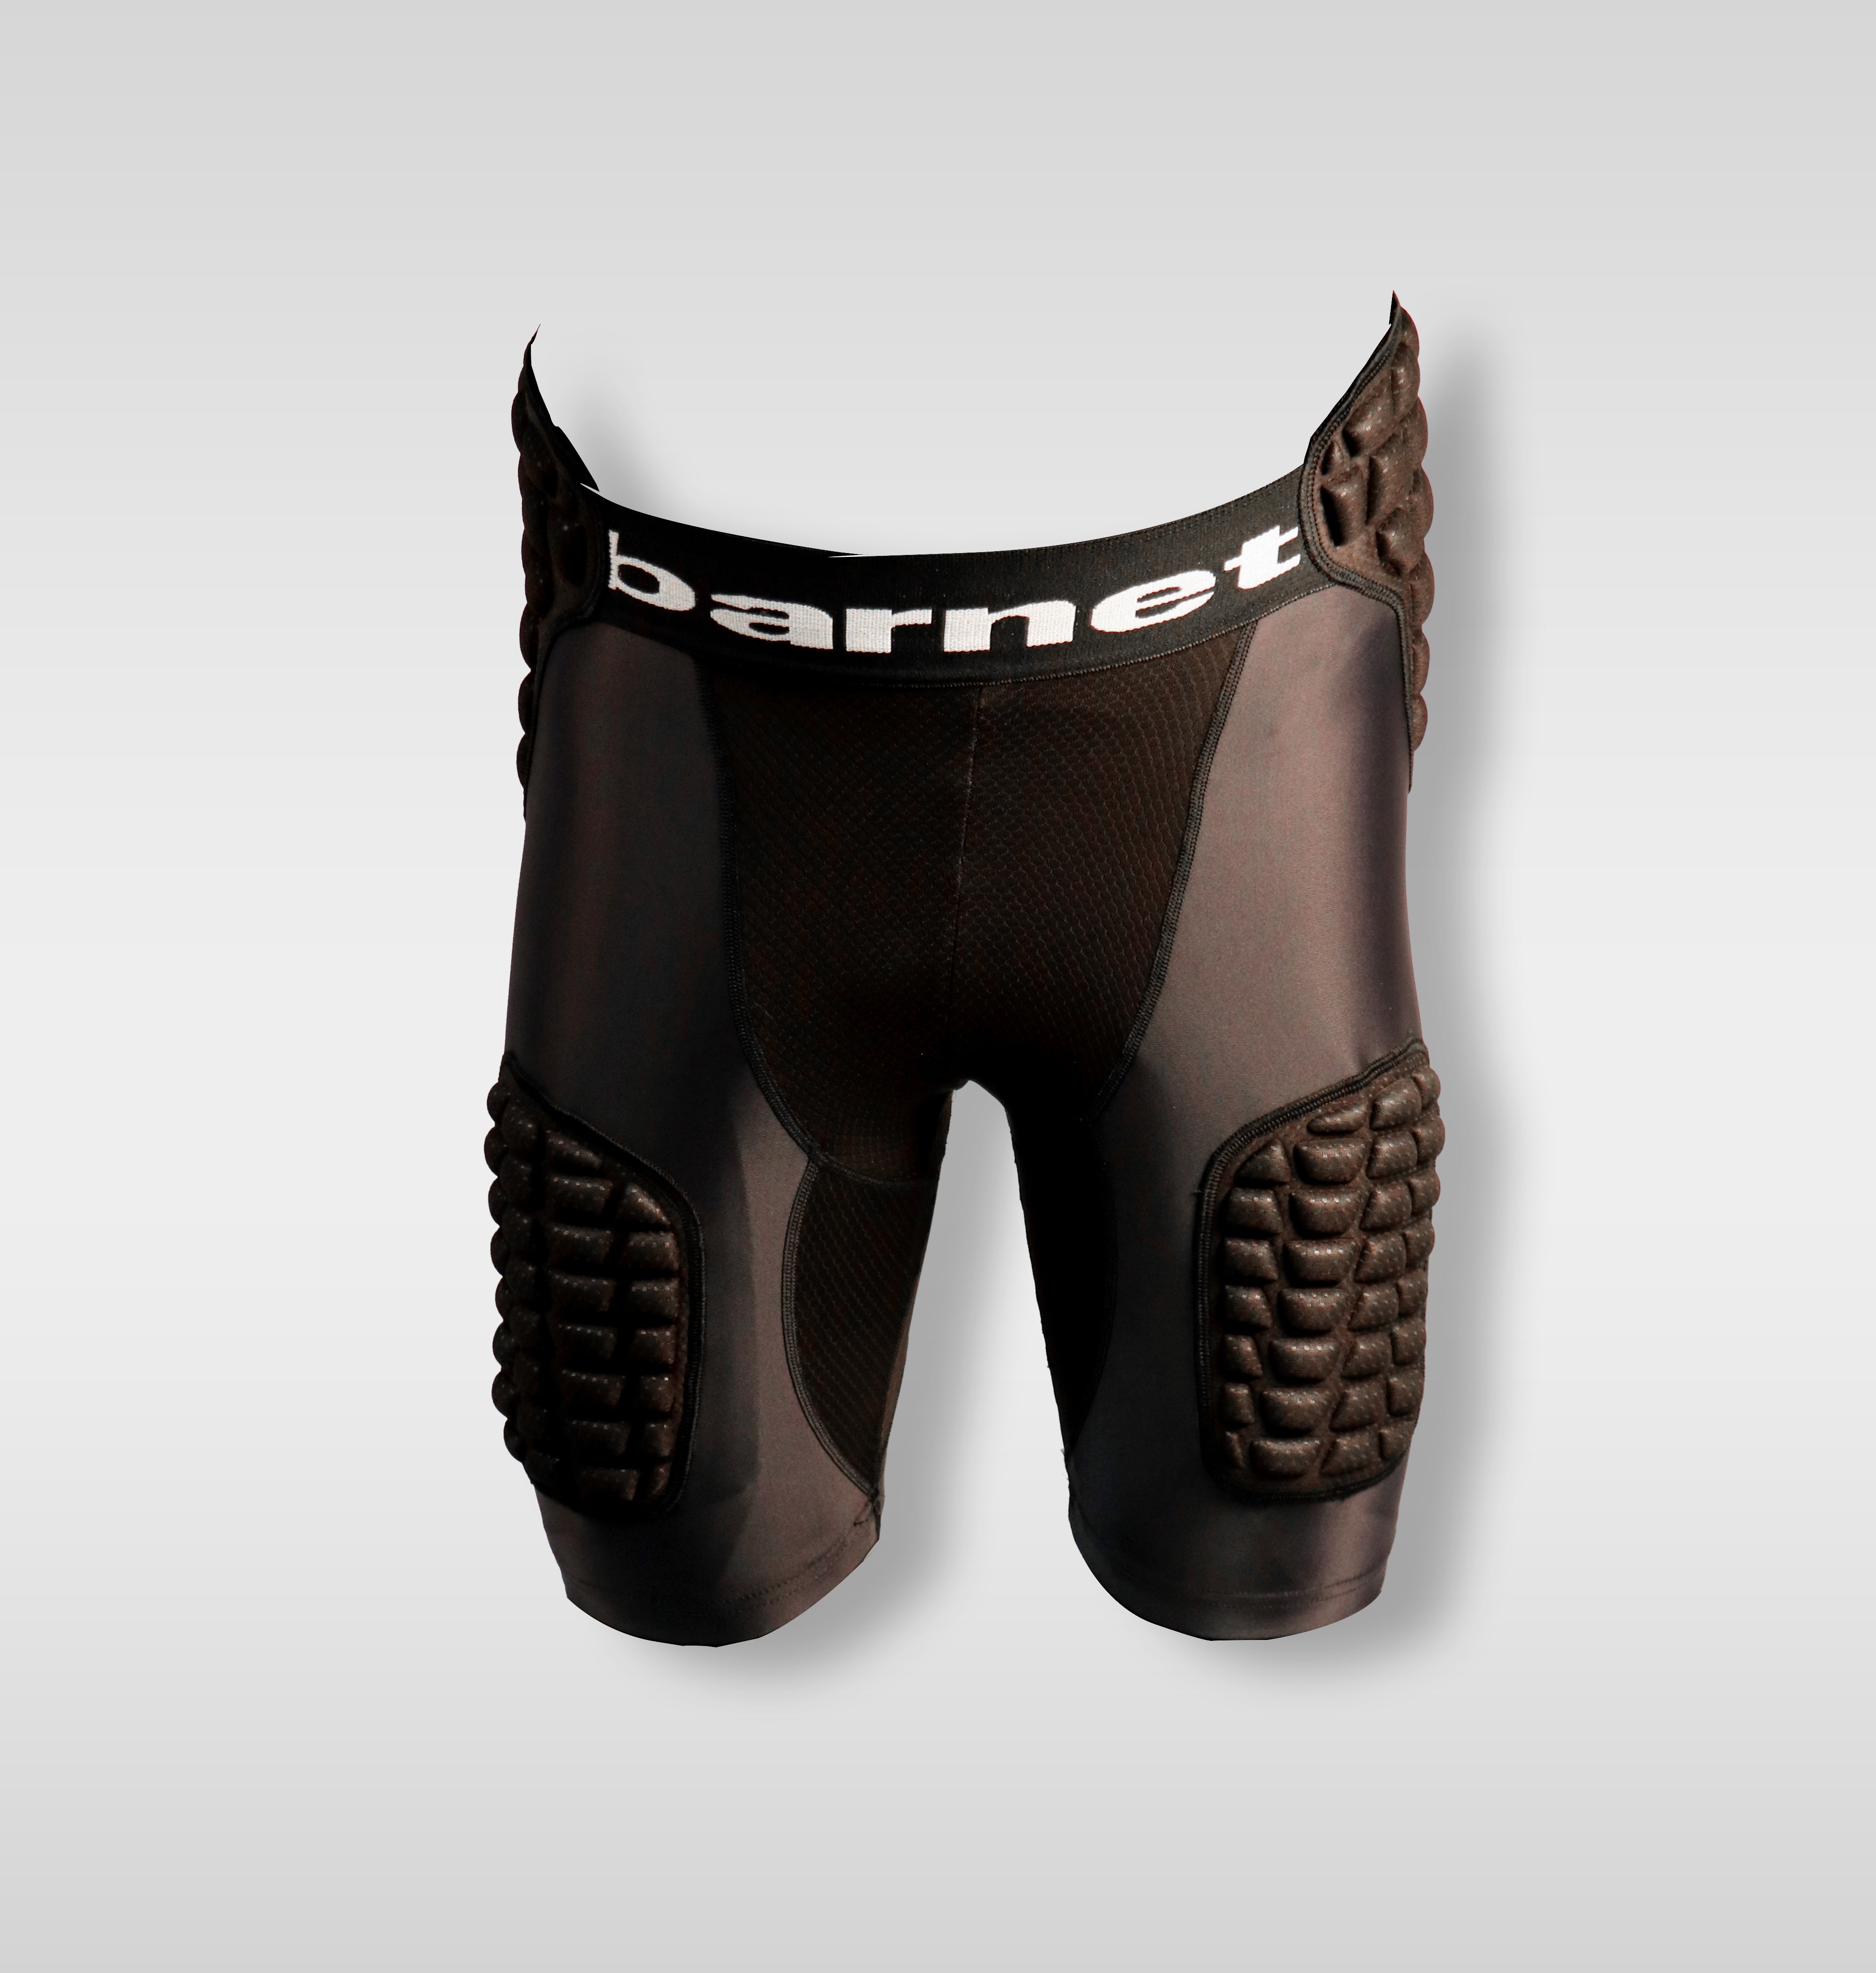 Youth Football Girdle Stromgren 5 Pad Protection Compression